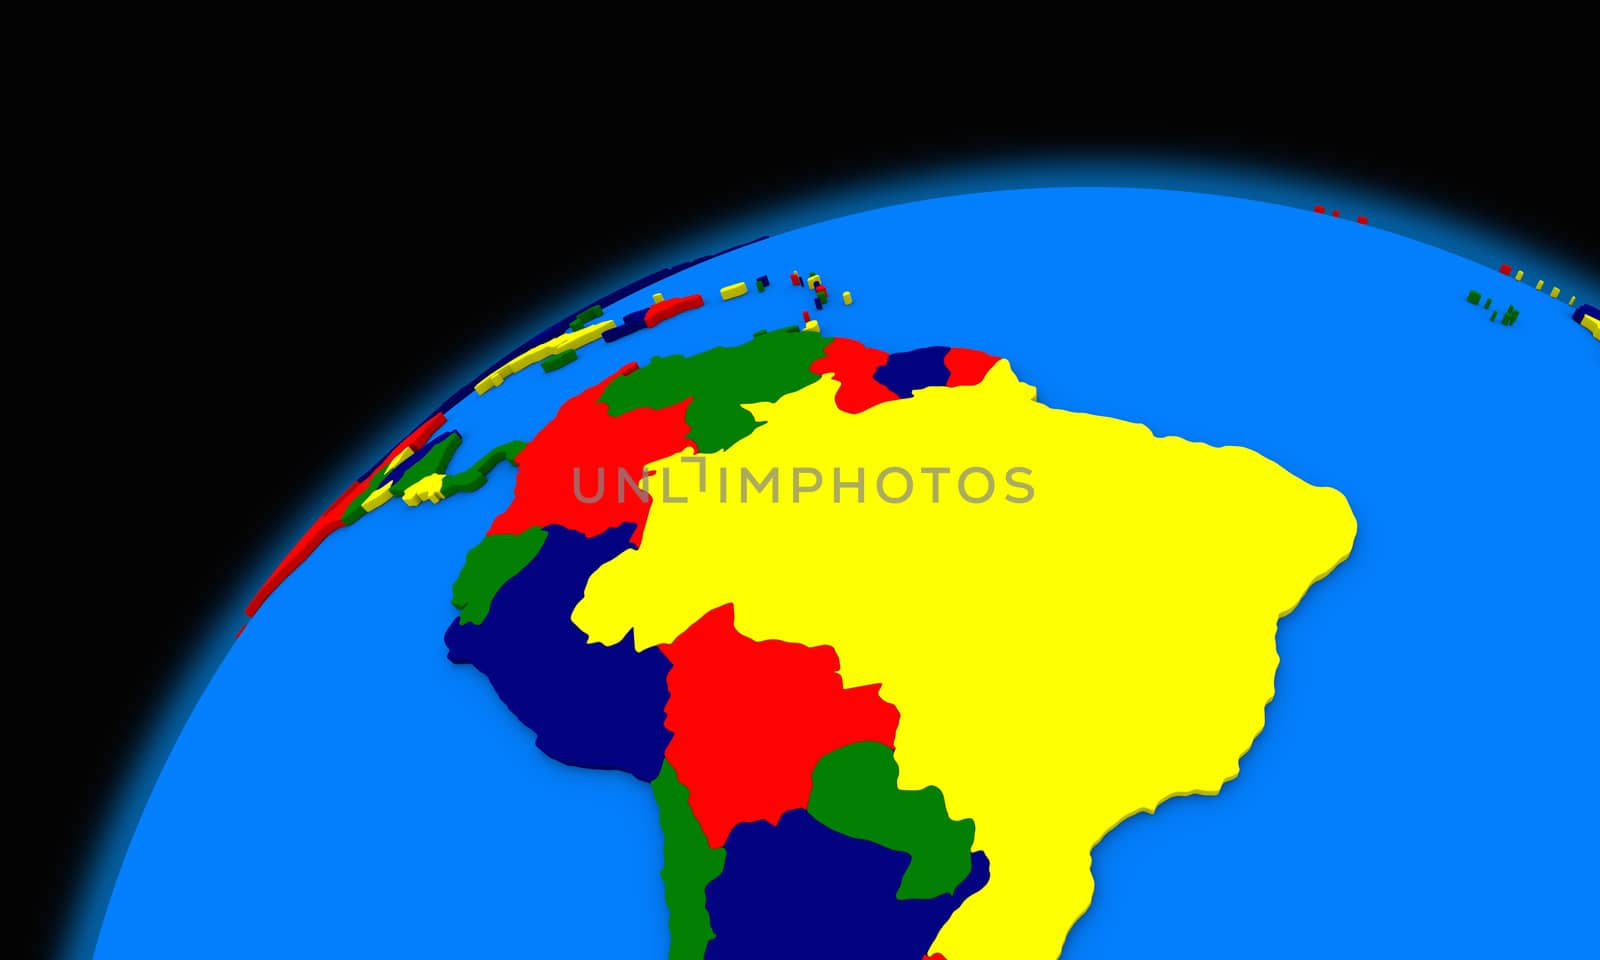 south America on planet Earth political map by Harvepino